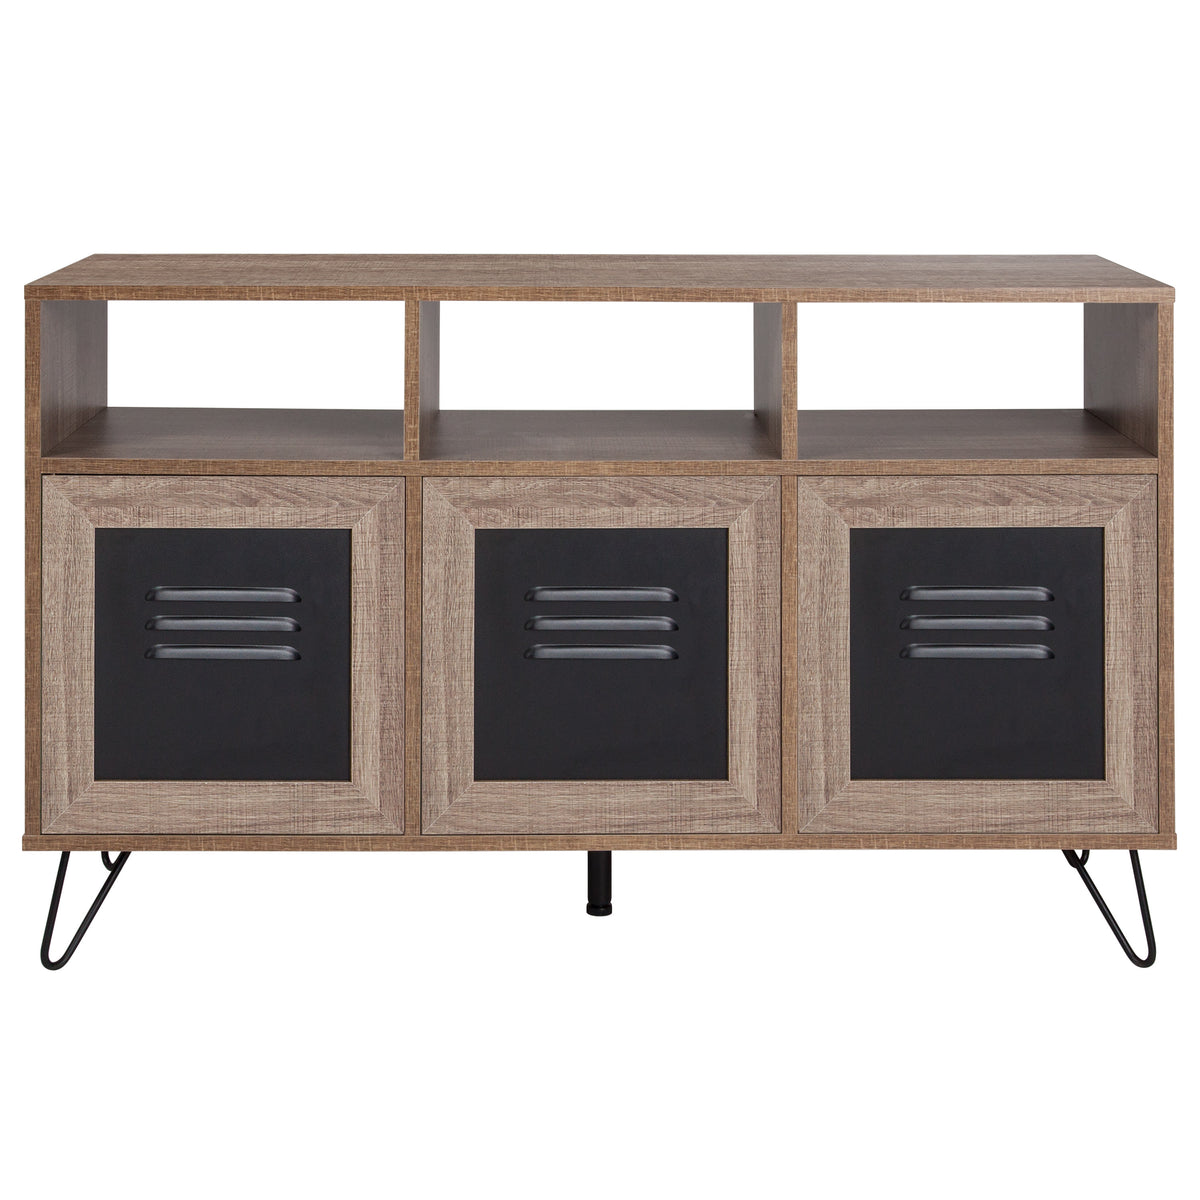 44inchW 3 Shelf Storage Console/Cabinet with Metal Doors in Rustic Wood Finish